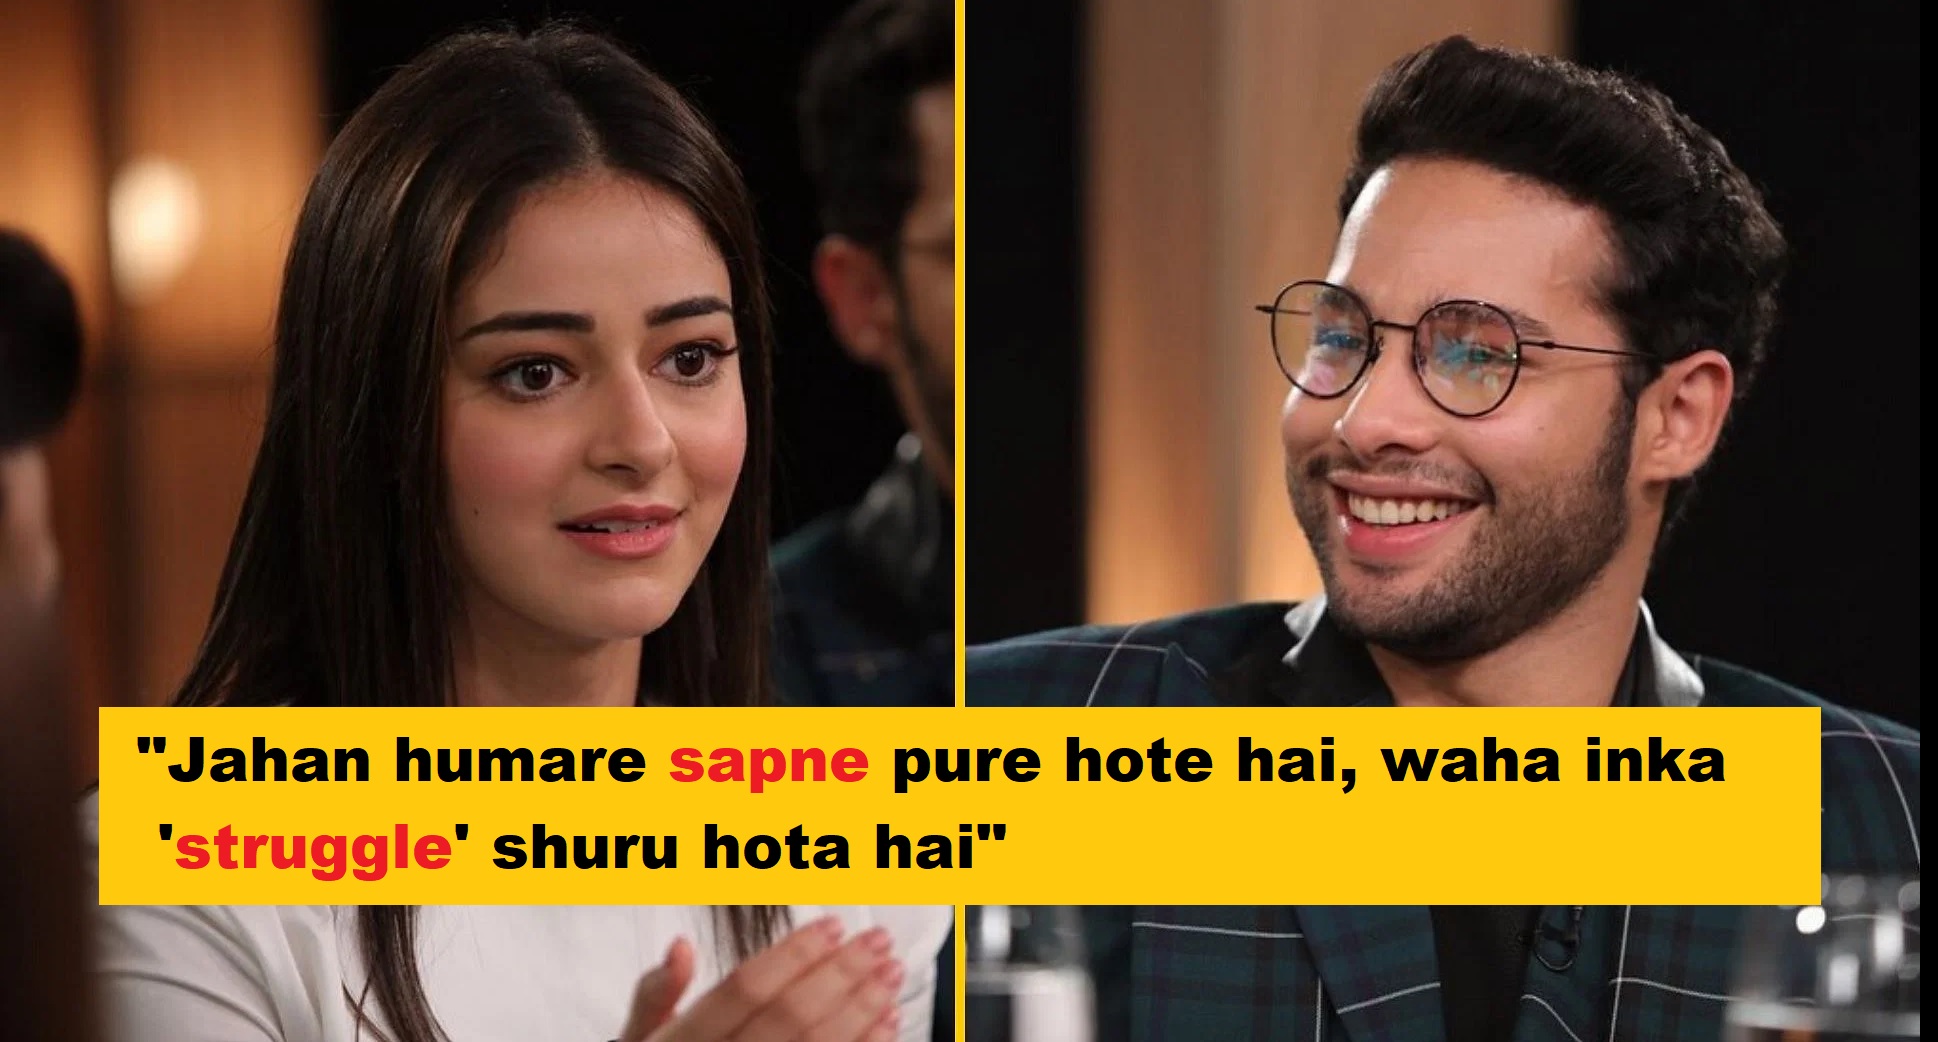 When Siddhant Chaturvedi Reminded A Clueless Ananya Pandey About ‘Real’ Struggle Of Bollywood Outsiders, ‘Your Struggle Starts Where Our Dreams Are Fulfilled’